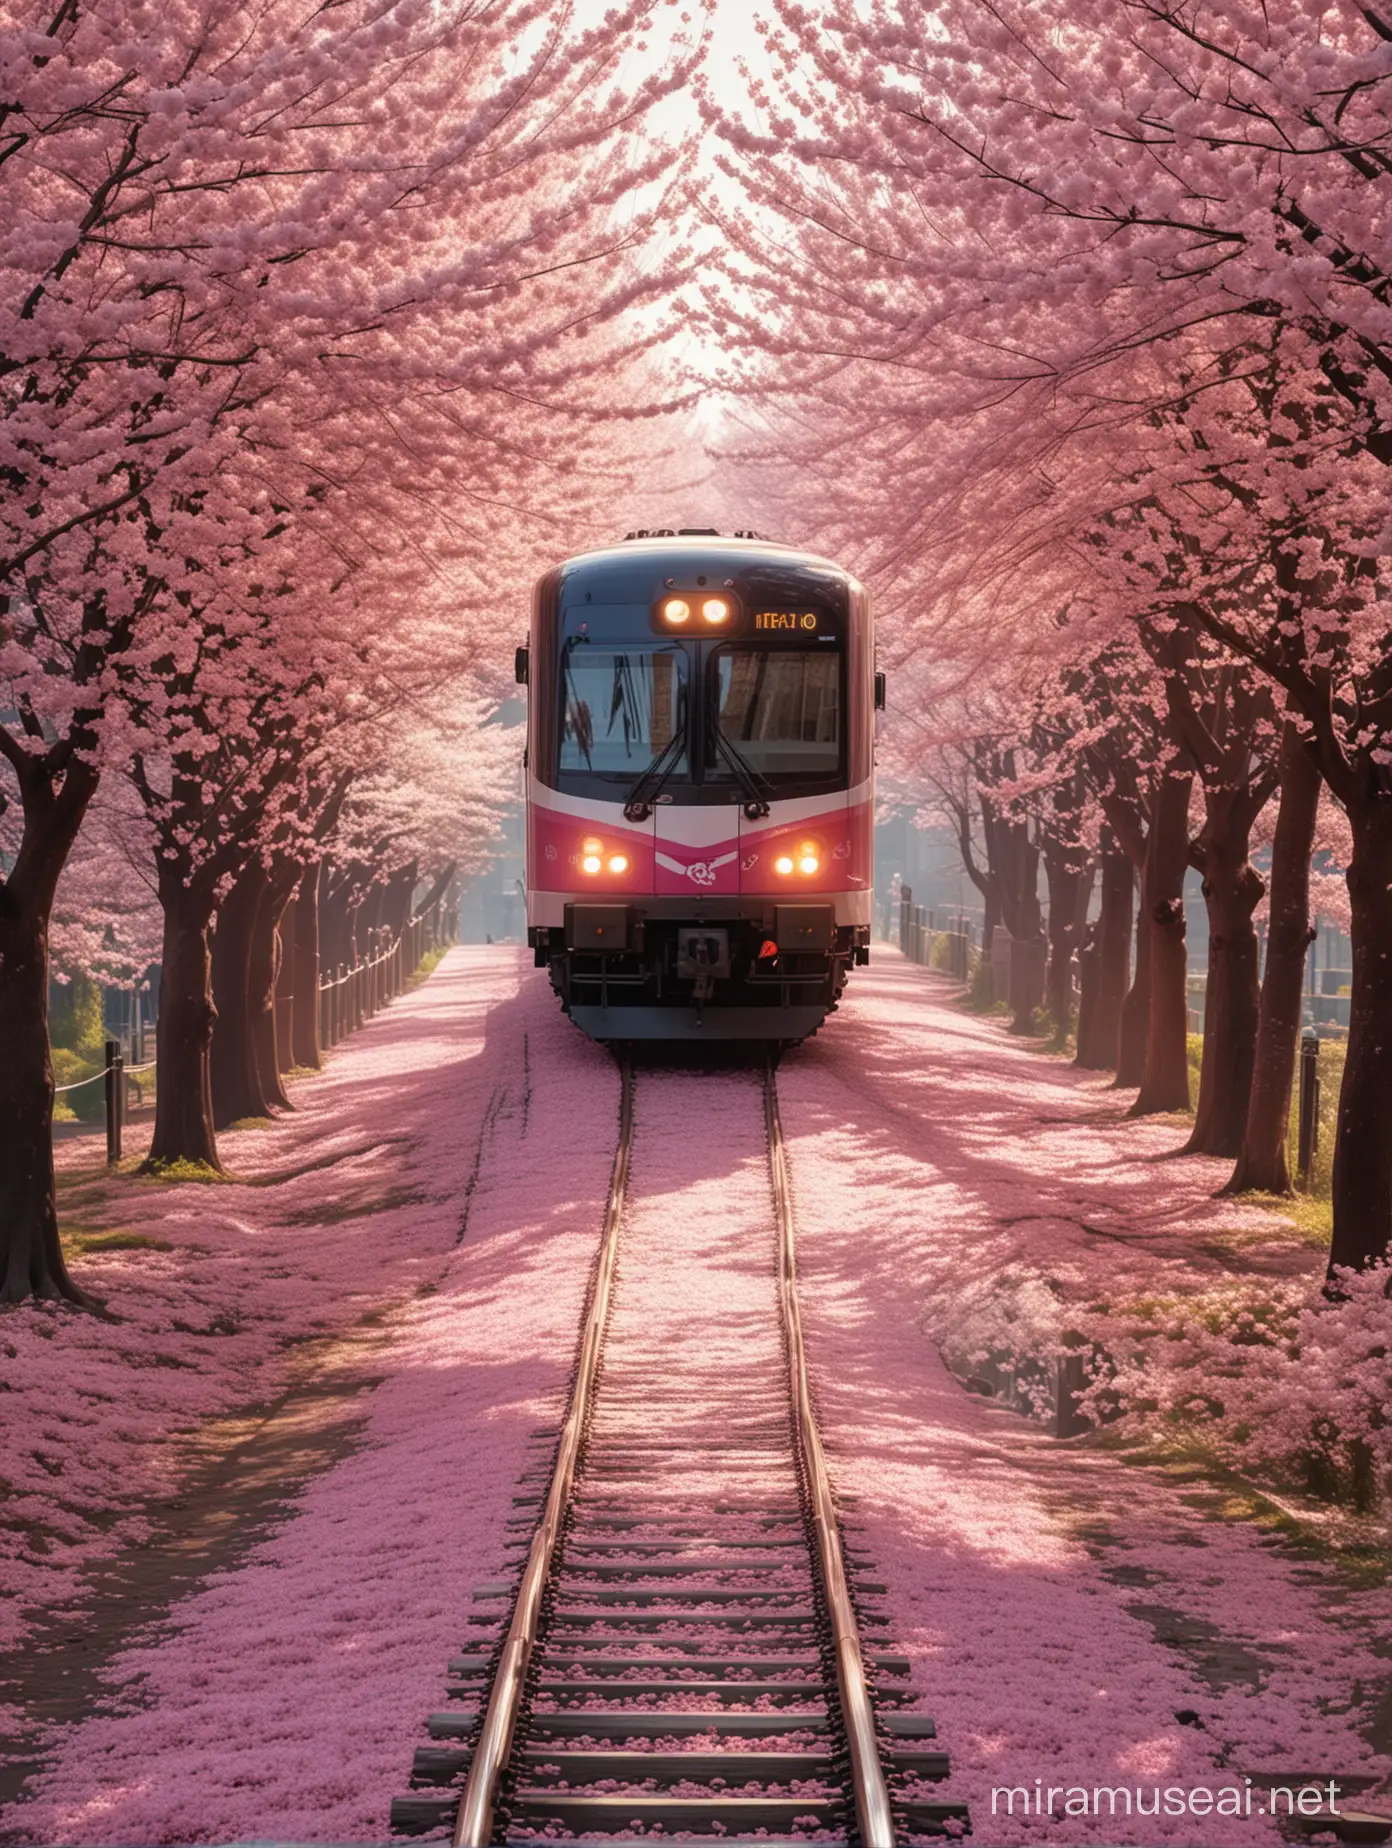 A breathtakingly beautiful real-life photograph of a curved rail train cross lined with fully bloomed cherry blossom trees, the scene is covered with cherry blossom petals, sunlight filtering through the petals creating a serene and magical atmosphere, masterpiece,best quality, highres, 8K photograph, Nikon